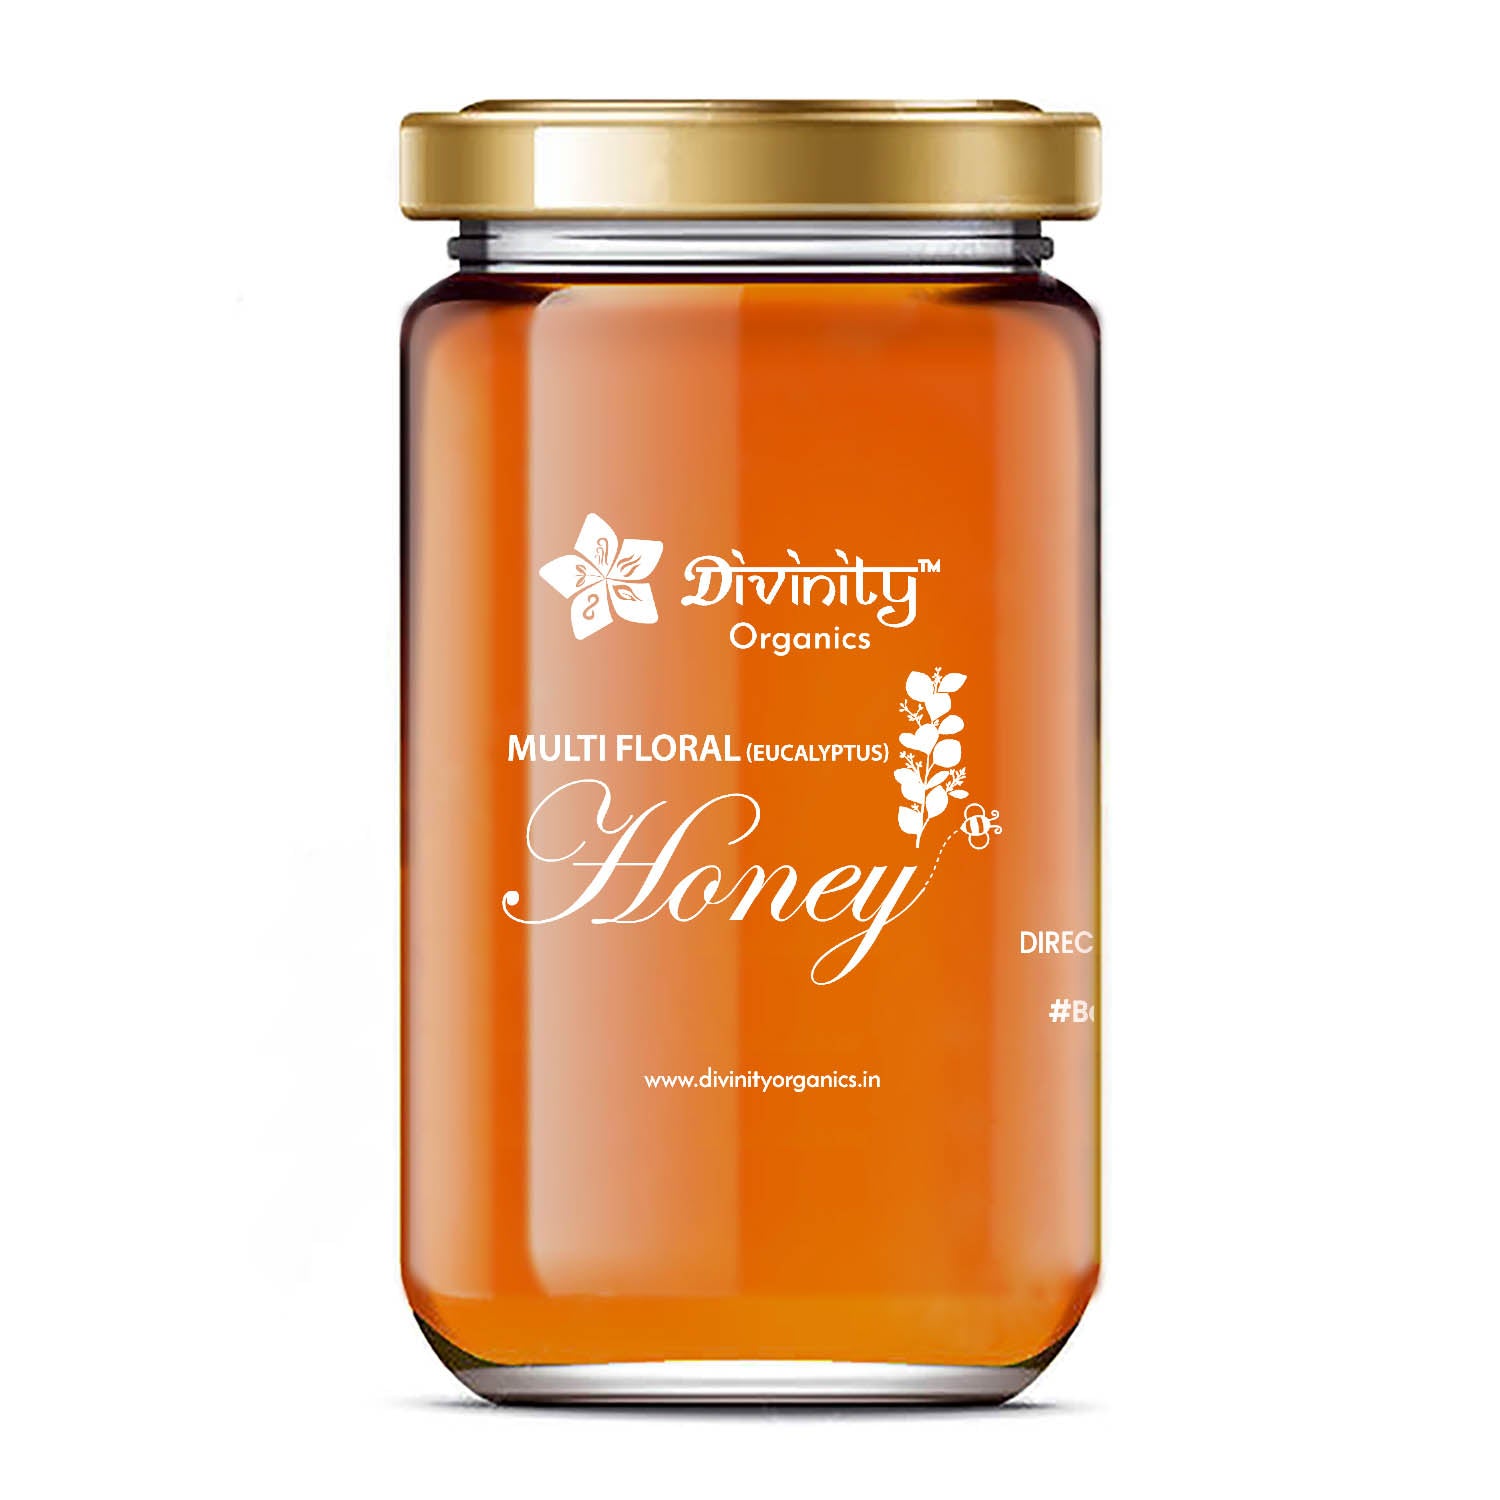 Divinity Organics Multi-floral honey (Eucalyptus) -Collected from a wide array of flowers, the multiflora honey can be a mixed bag of rich flavours while offering multiple health benefits. This amber-coloured liquid is rather exotic since the taste of multiflora honey can be a little bit of a rollercoaster ride- a burst of new flavour in your mouth with each spoon.